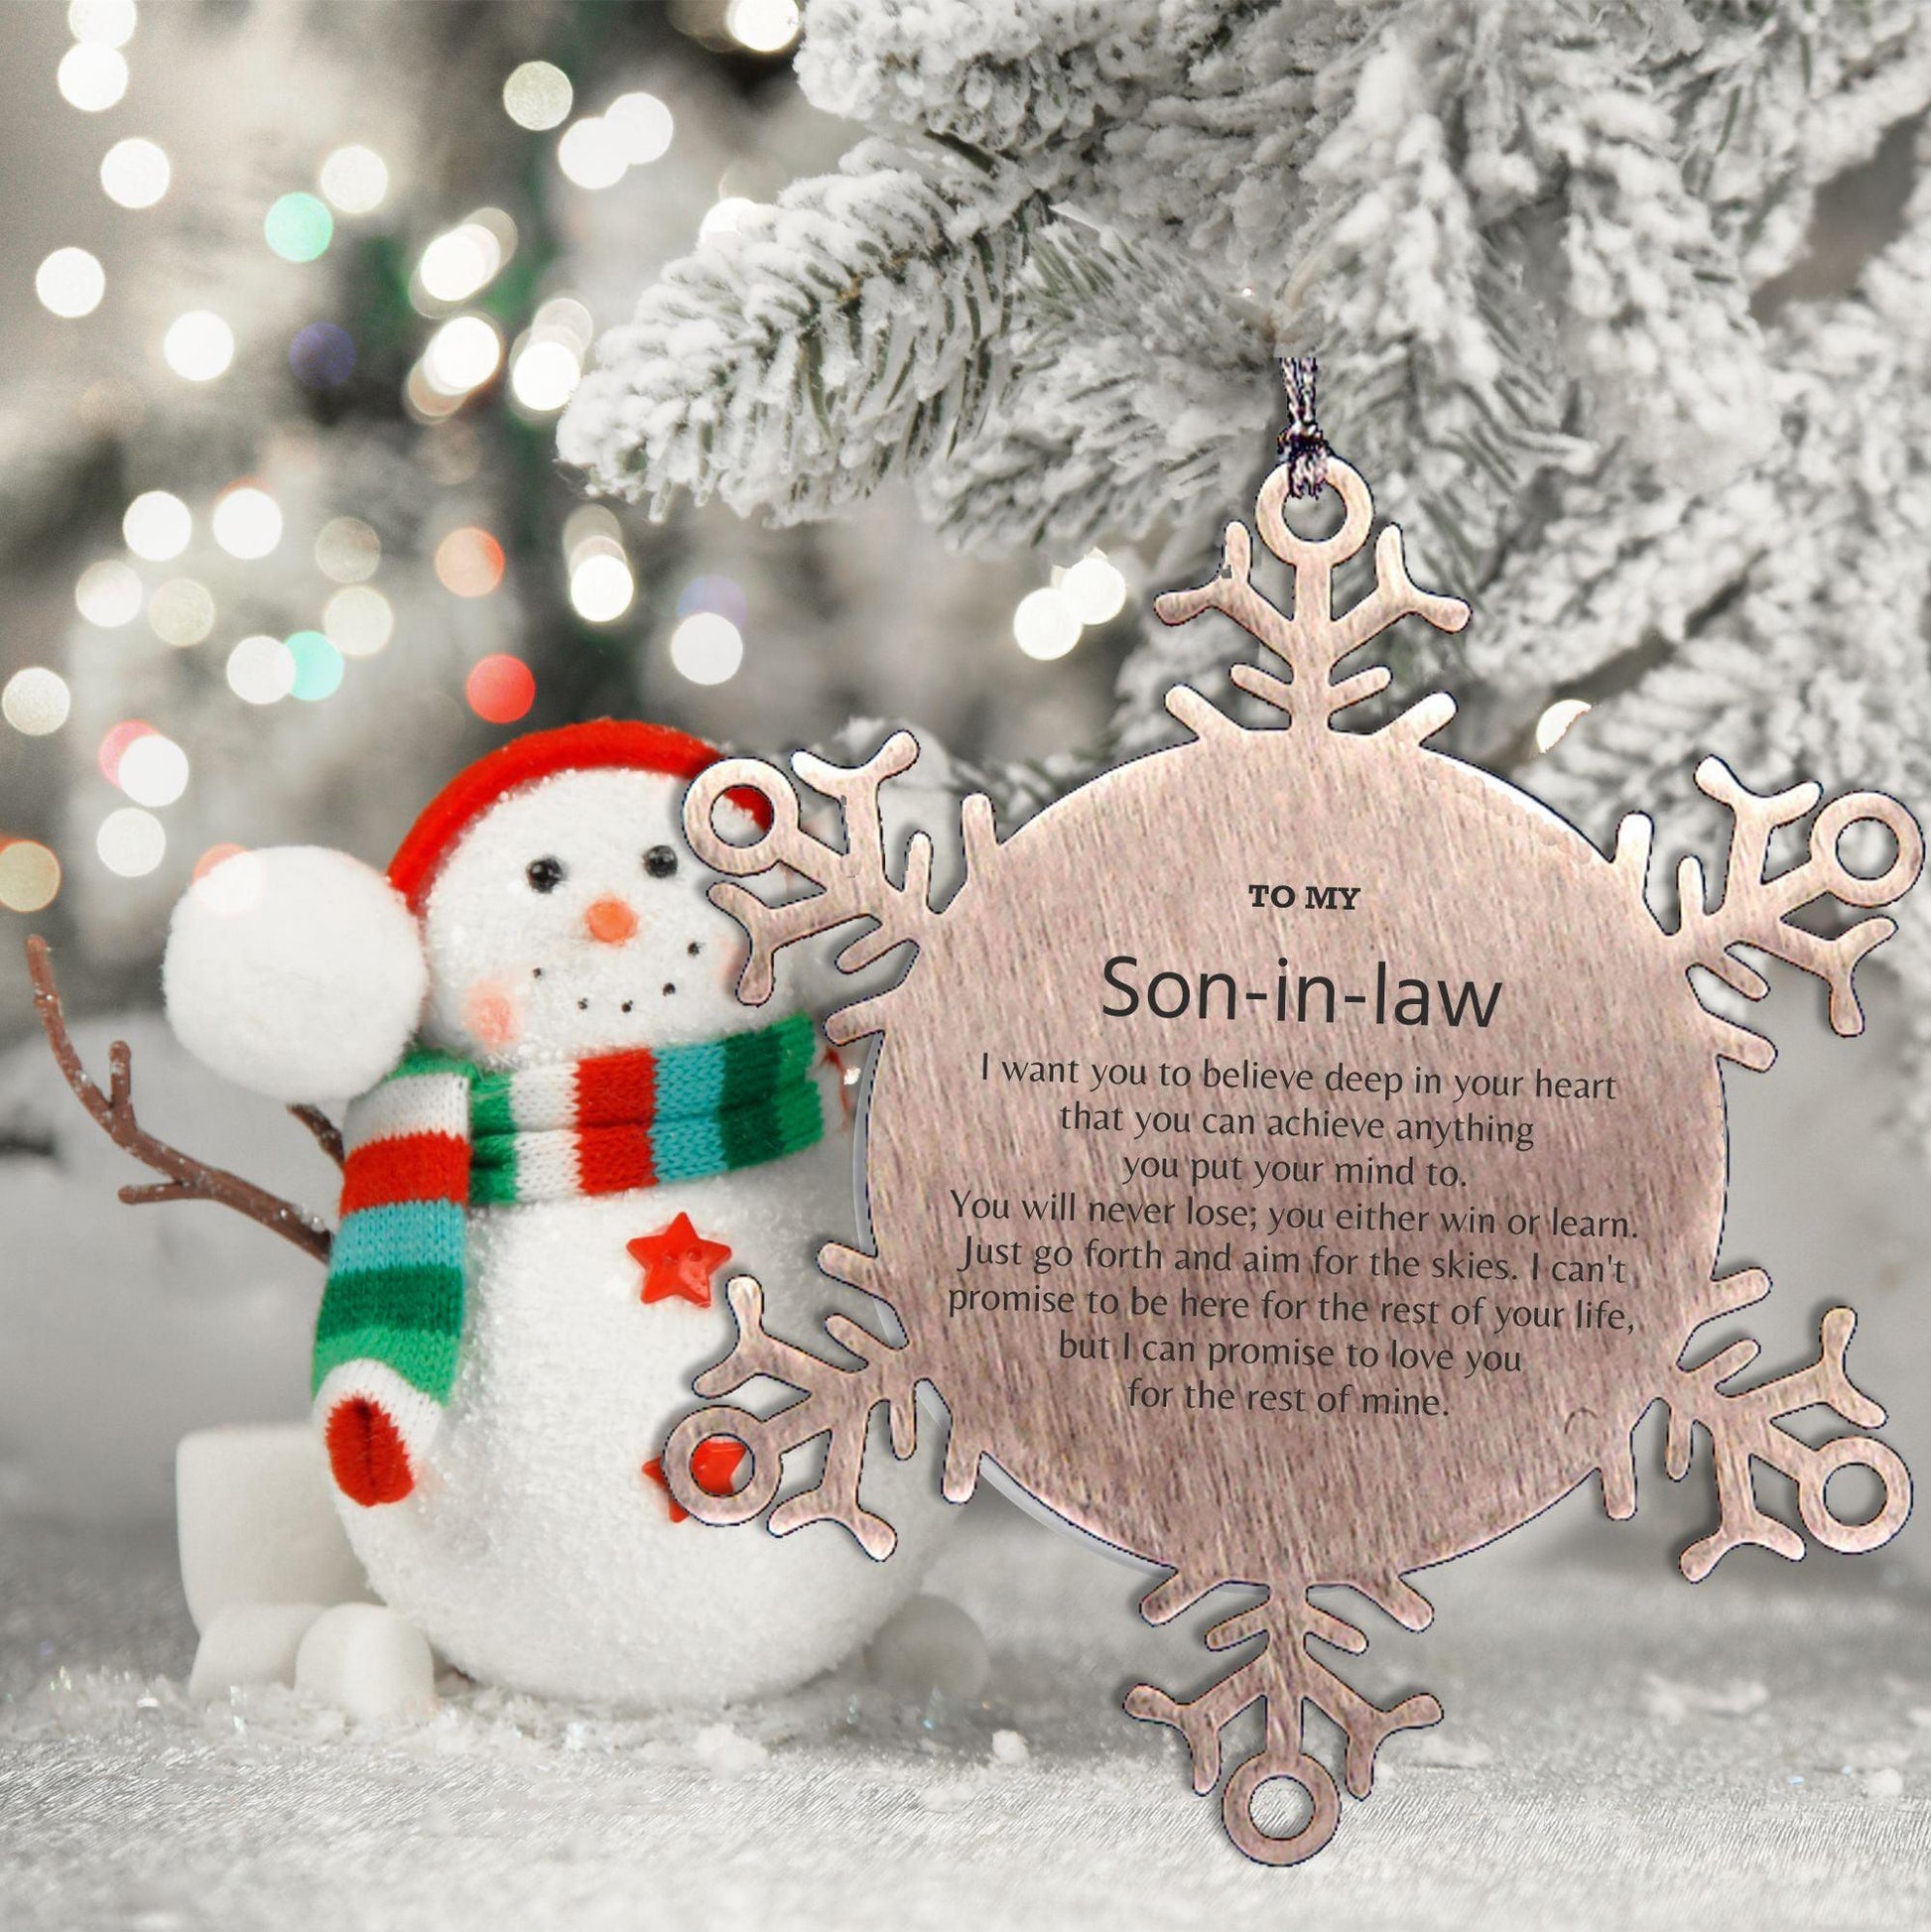 Motivational Son In Law Snowflake Ornament, Son In Law I can promise to love you for the rest of mine, Christmas Ornament For Son In Law, Son In Law Gift for Women Men - Mallard Moon Gift Shop